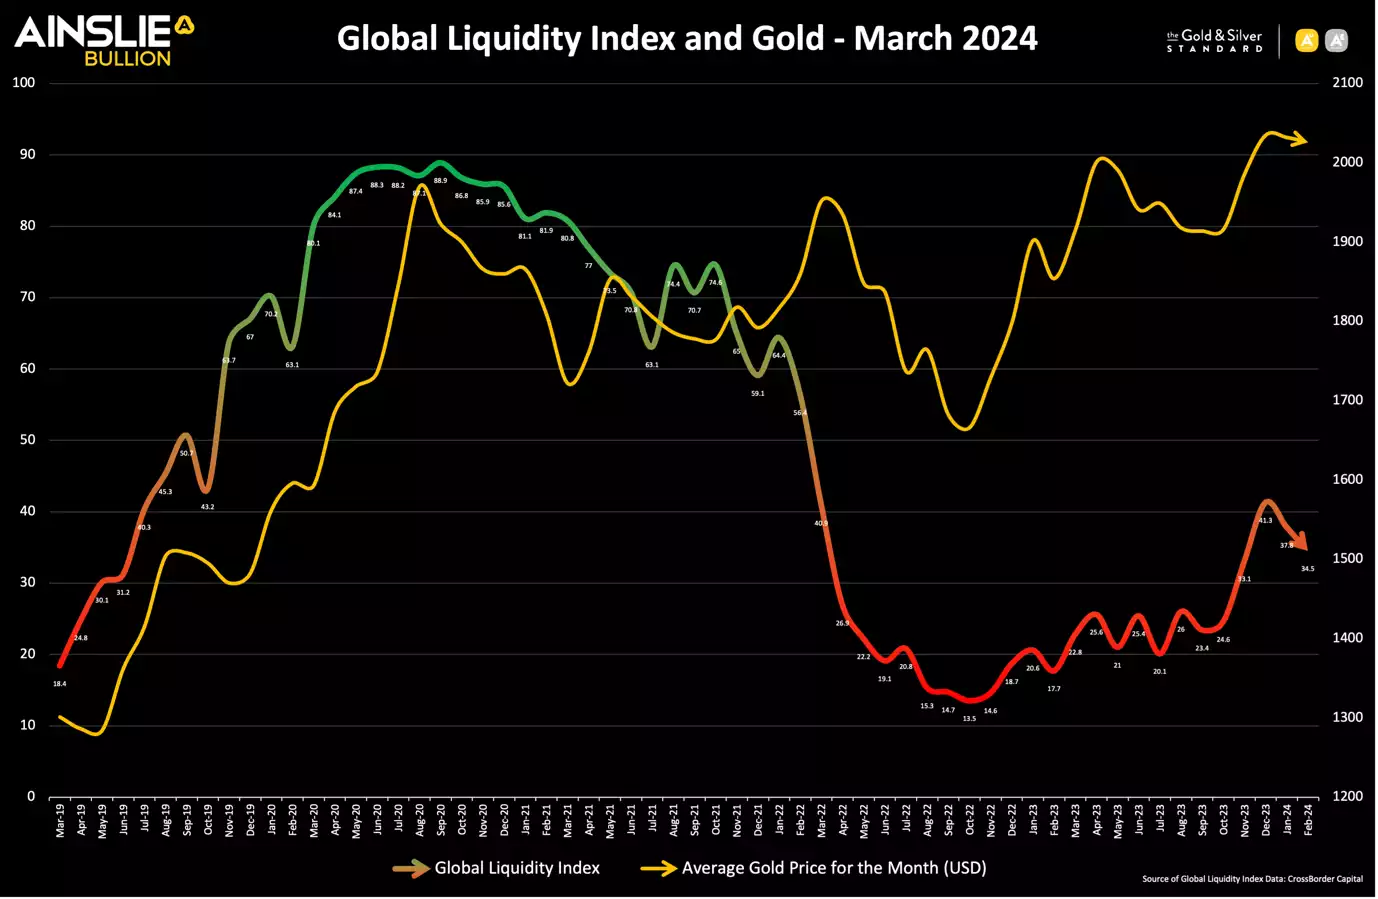 Global Liquidity Index and Gold - March 20224